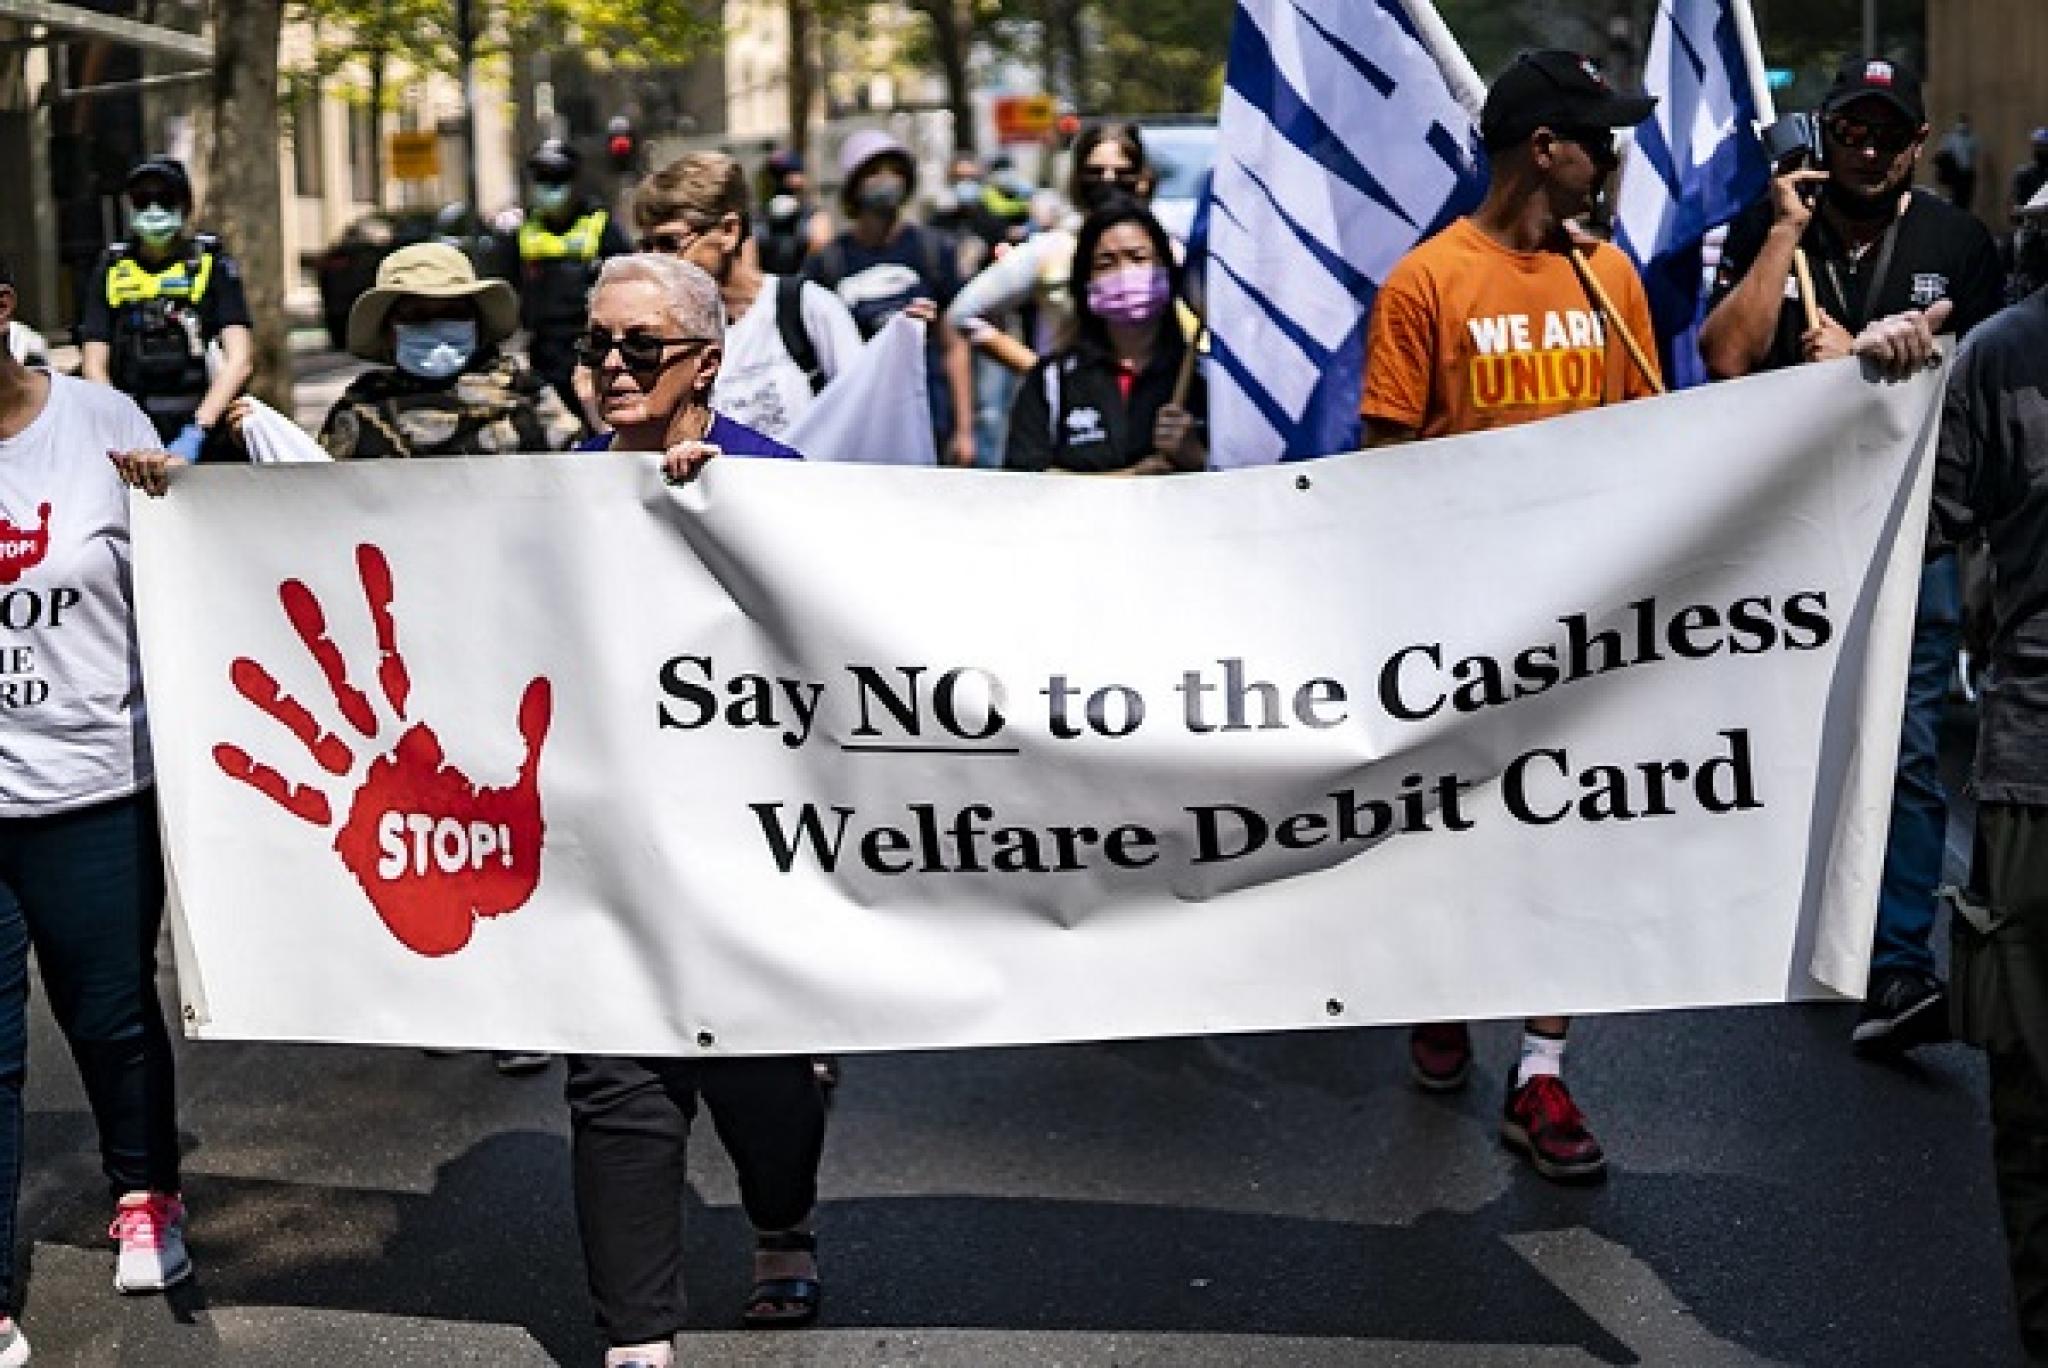 Image of banner opposing the Cashless Welfare Debit Card at a 2021 ‘Demand a Living Wage for all’ rally in Melbourne, Victoria, by Matt Hrkac on flickr https://flic.kr/p/2kMhtEh, free to use under CC BY 2.0 DEED licence 